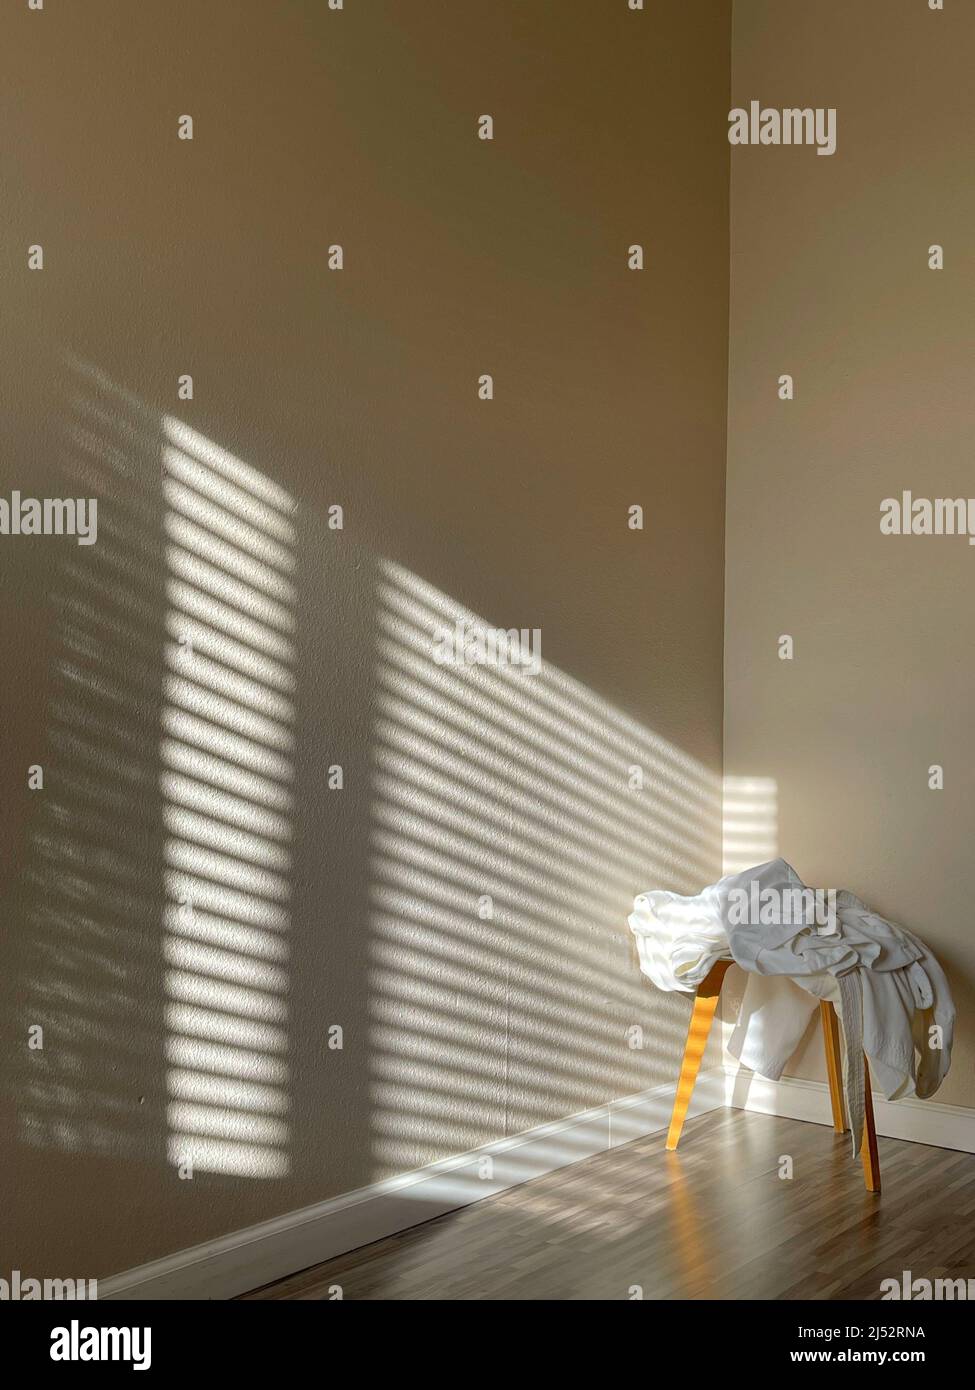 Dressing gown on a stool with sunlight streaming in through window blinds Stock Photo